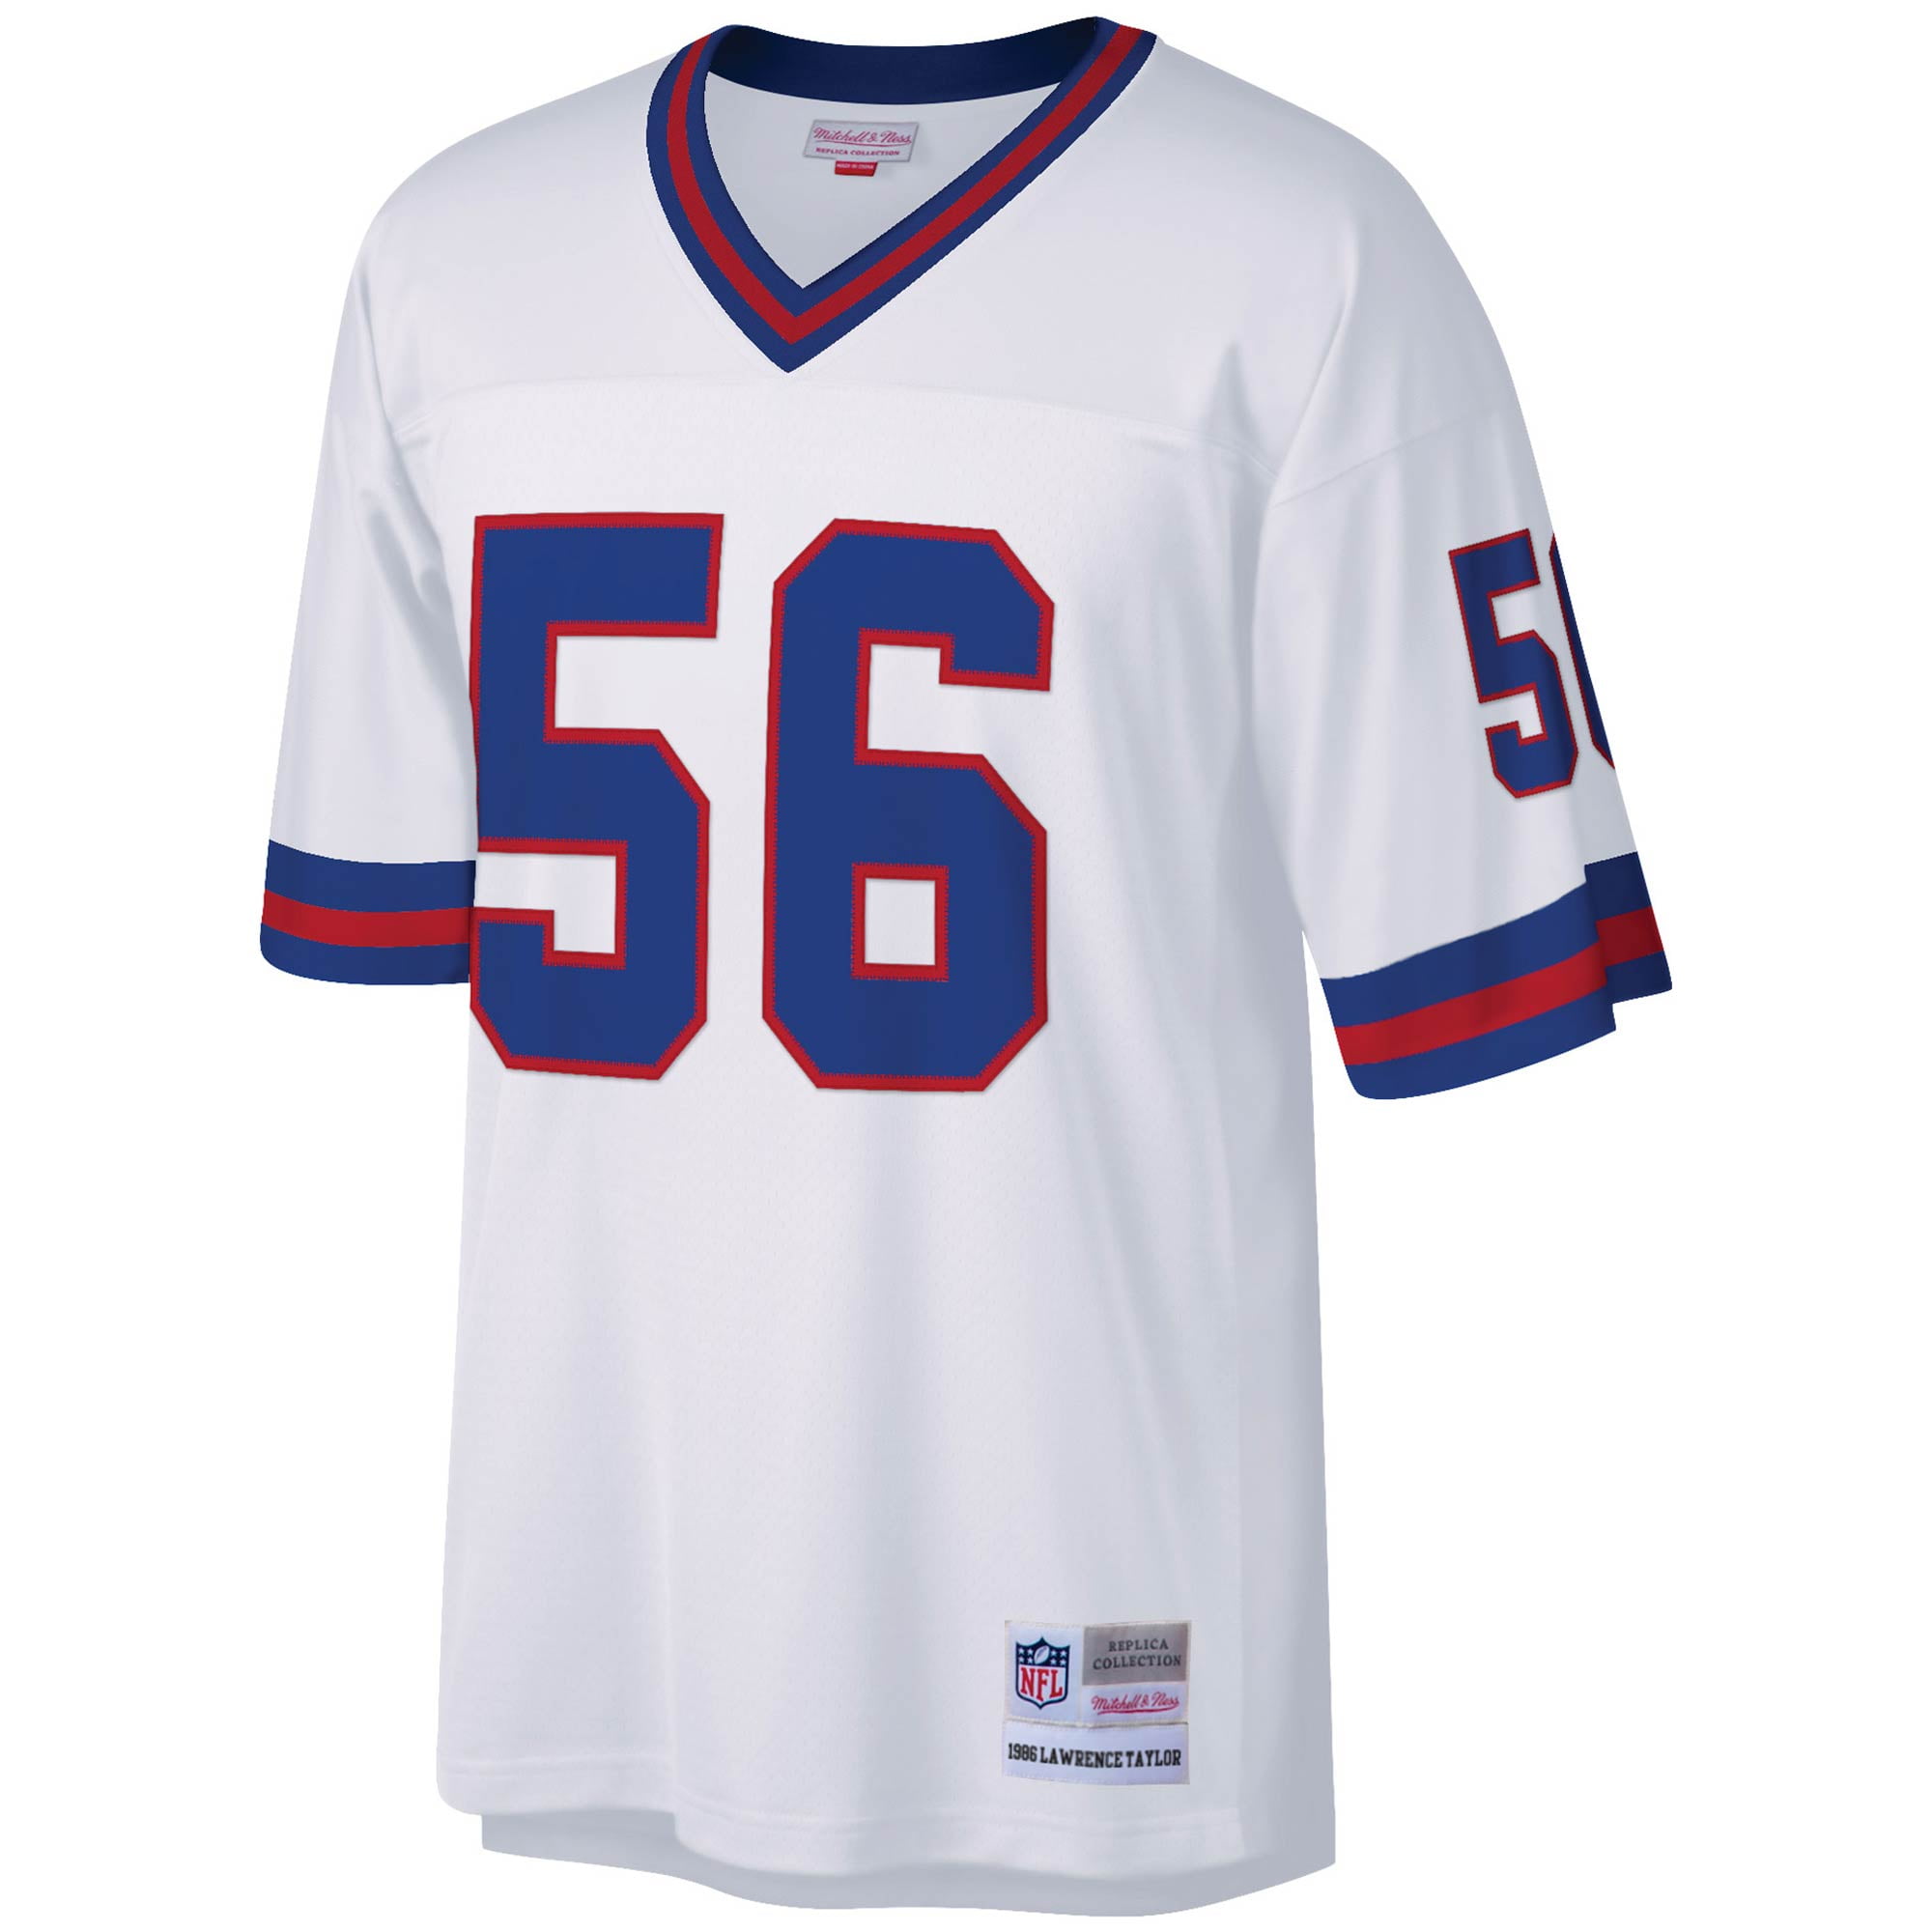 mitchell and ness lawrence taylor jersey